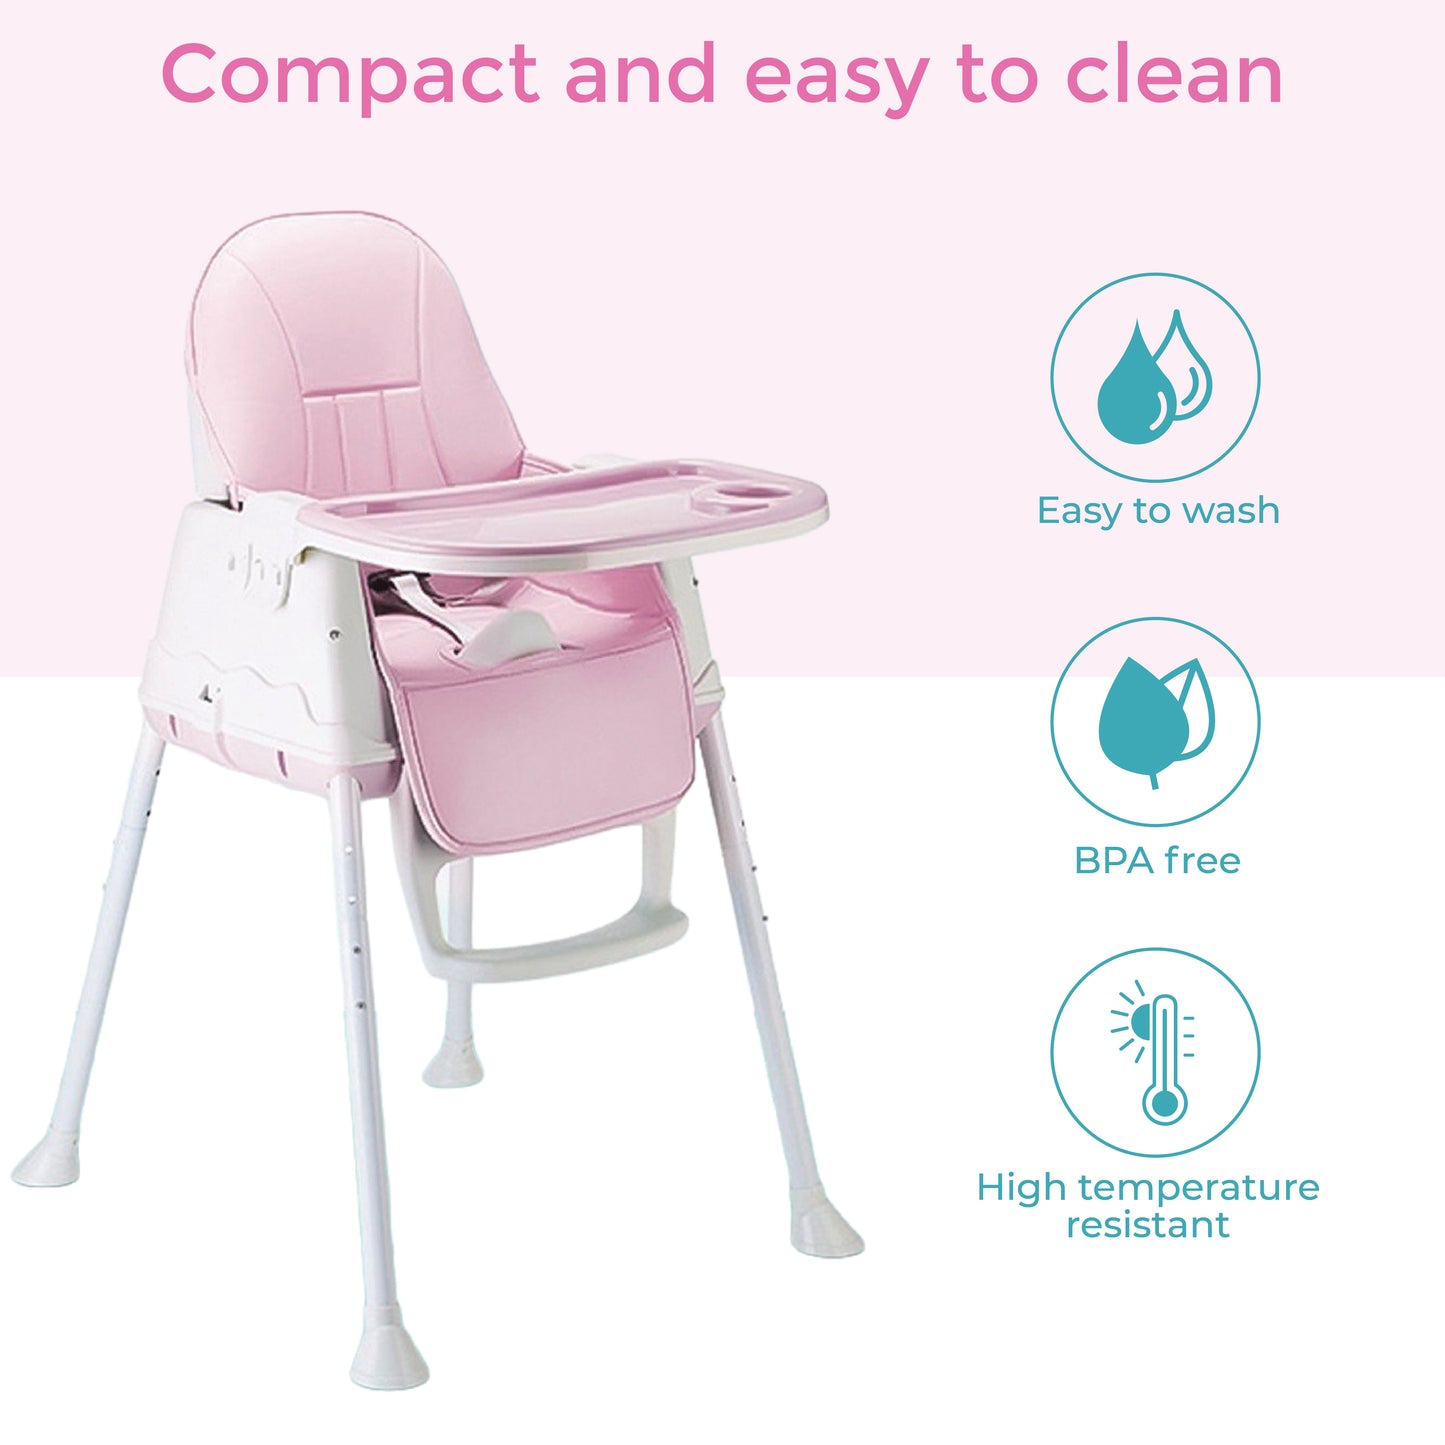 3 in 1 High Chair for Baby Kids, Feeding Booster Seat with Wheel and Cushion Age 12M- 2 Years (Pink)